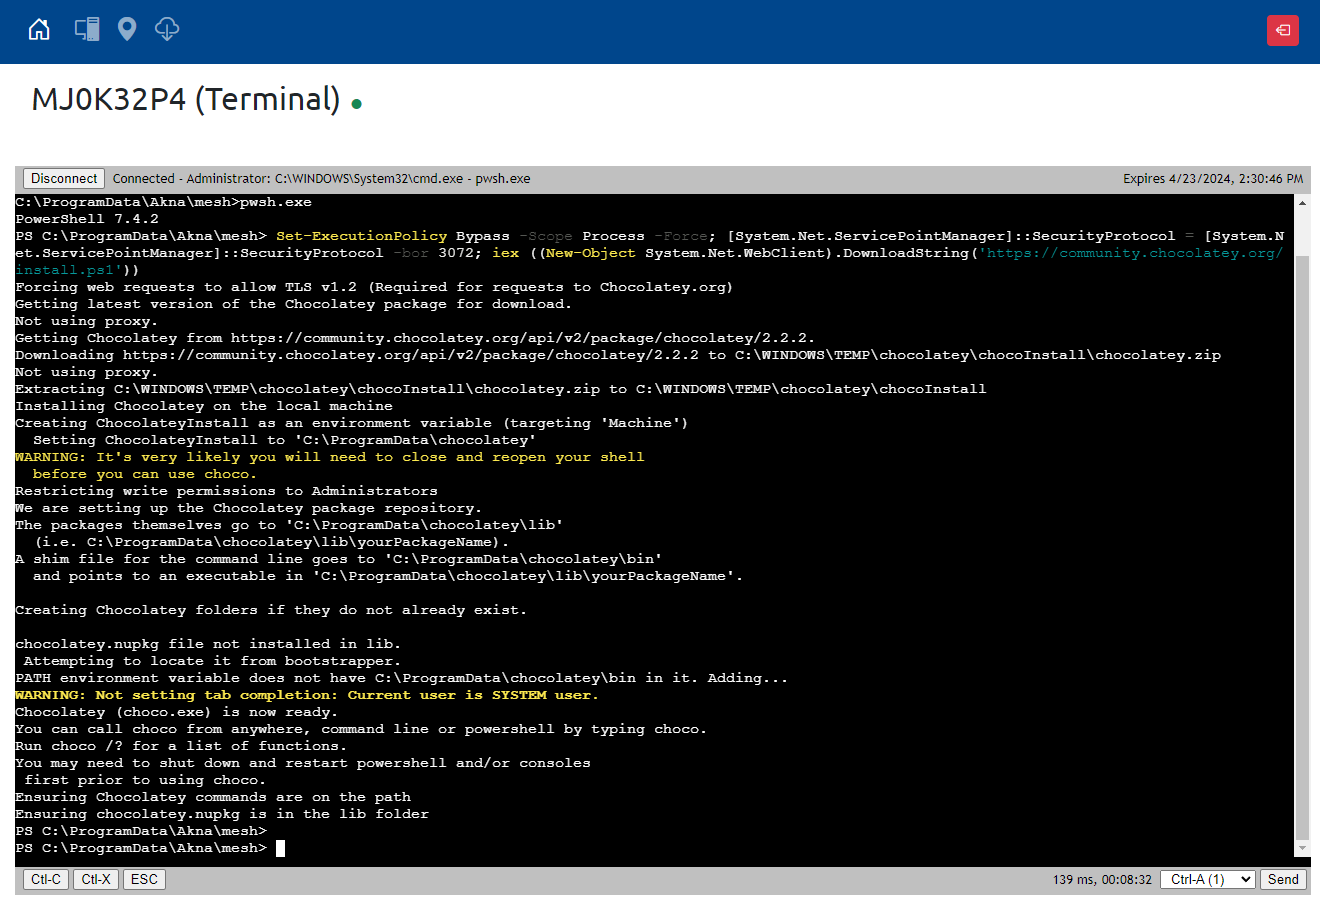 Install Chocolatey using PowerShell through the Remote Command-Line provided by Akna